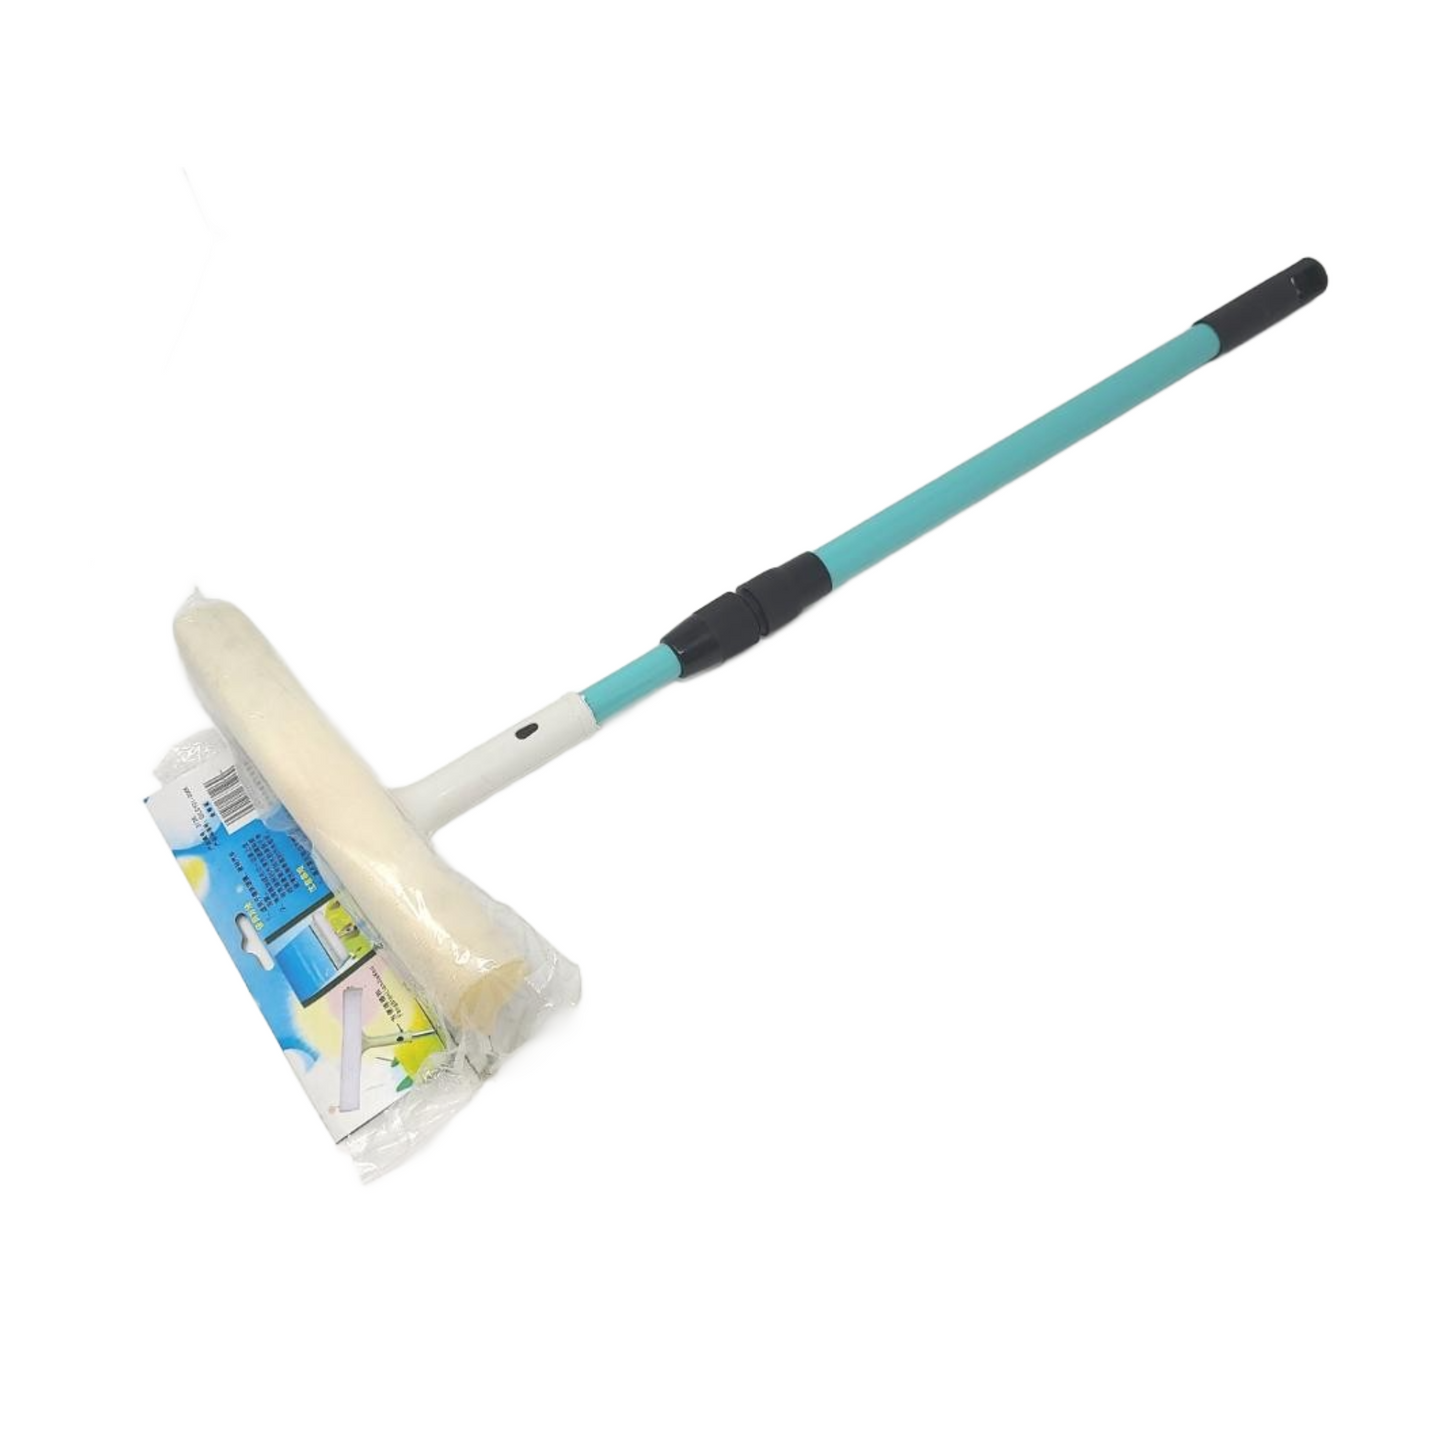 Window Squeegee with Extendable Handle